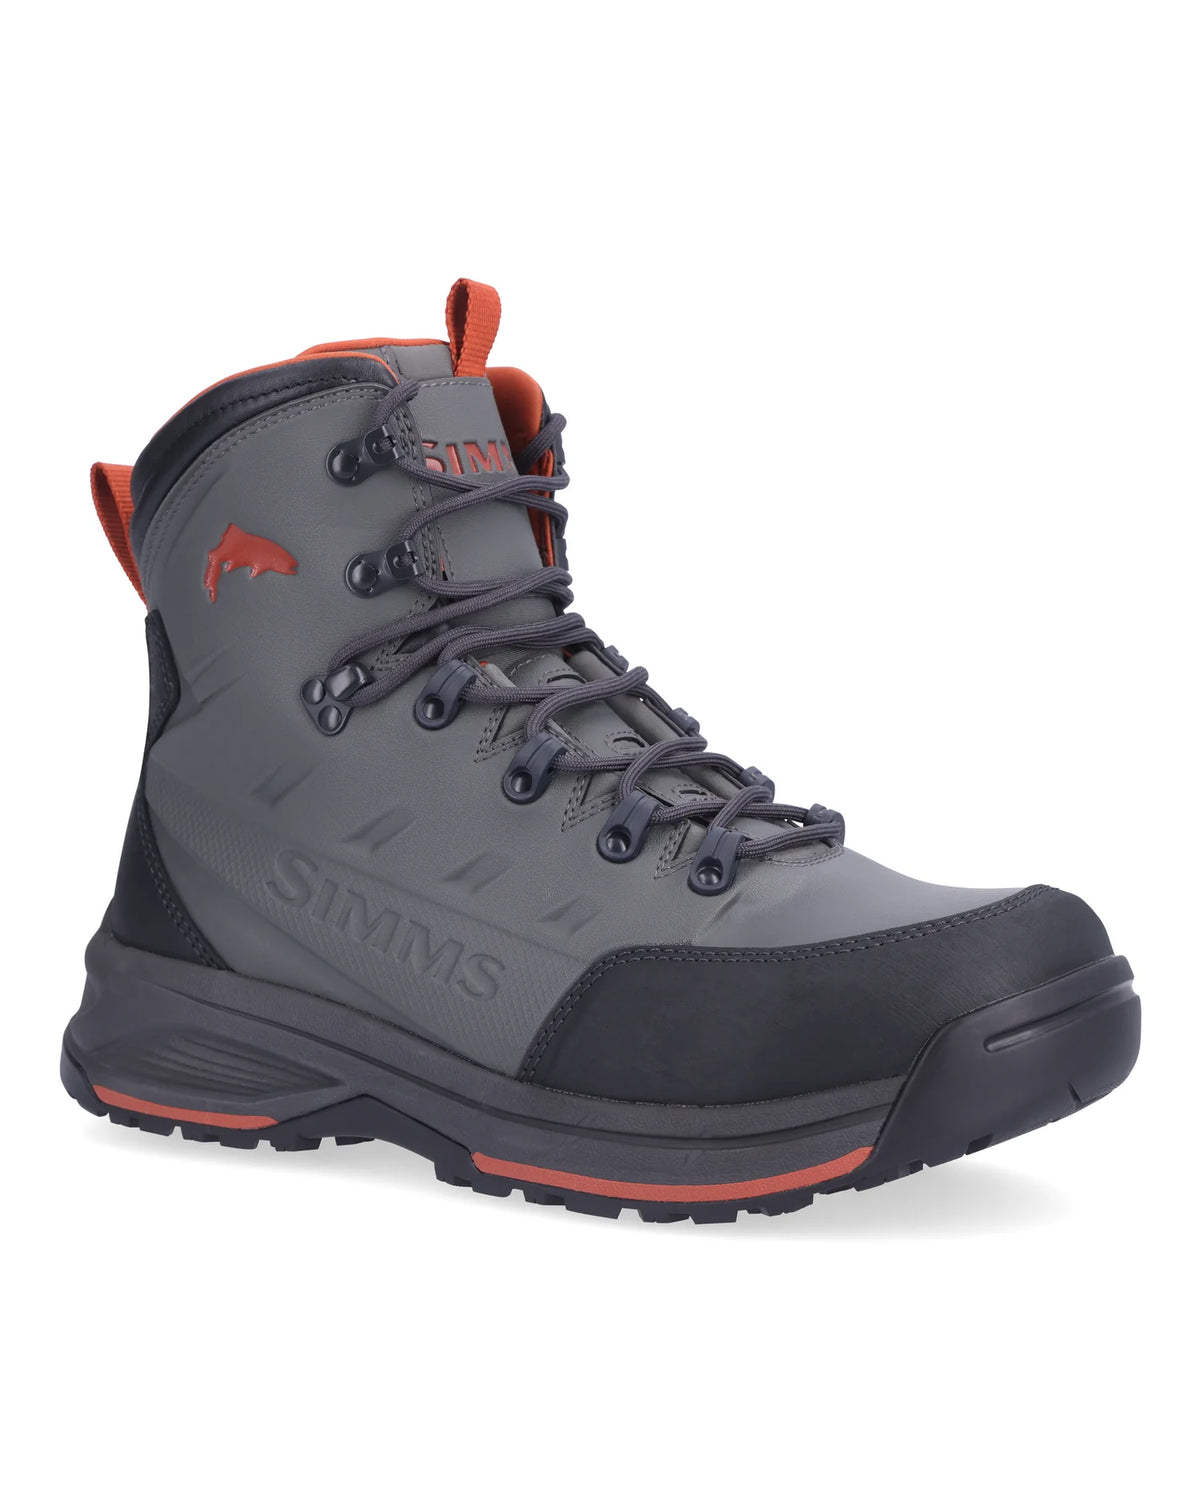 Simms Freestone Wading Boots — The Flyfisher